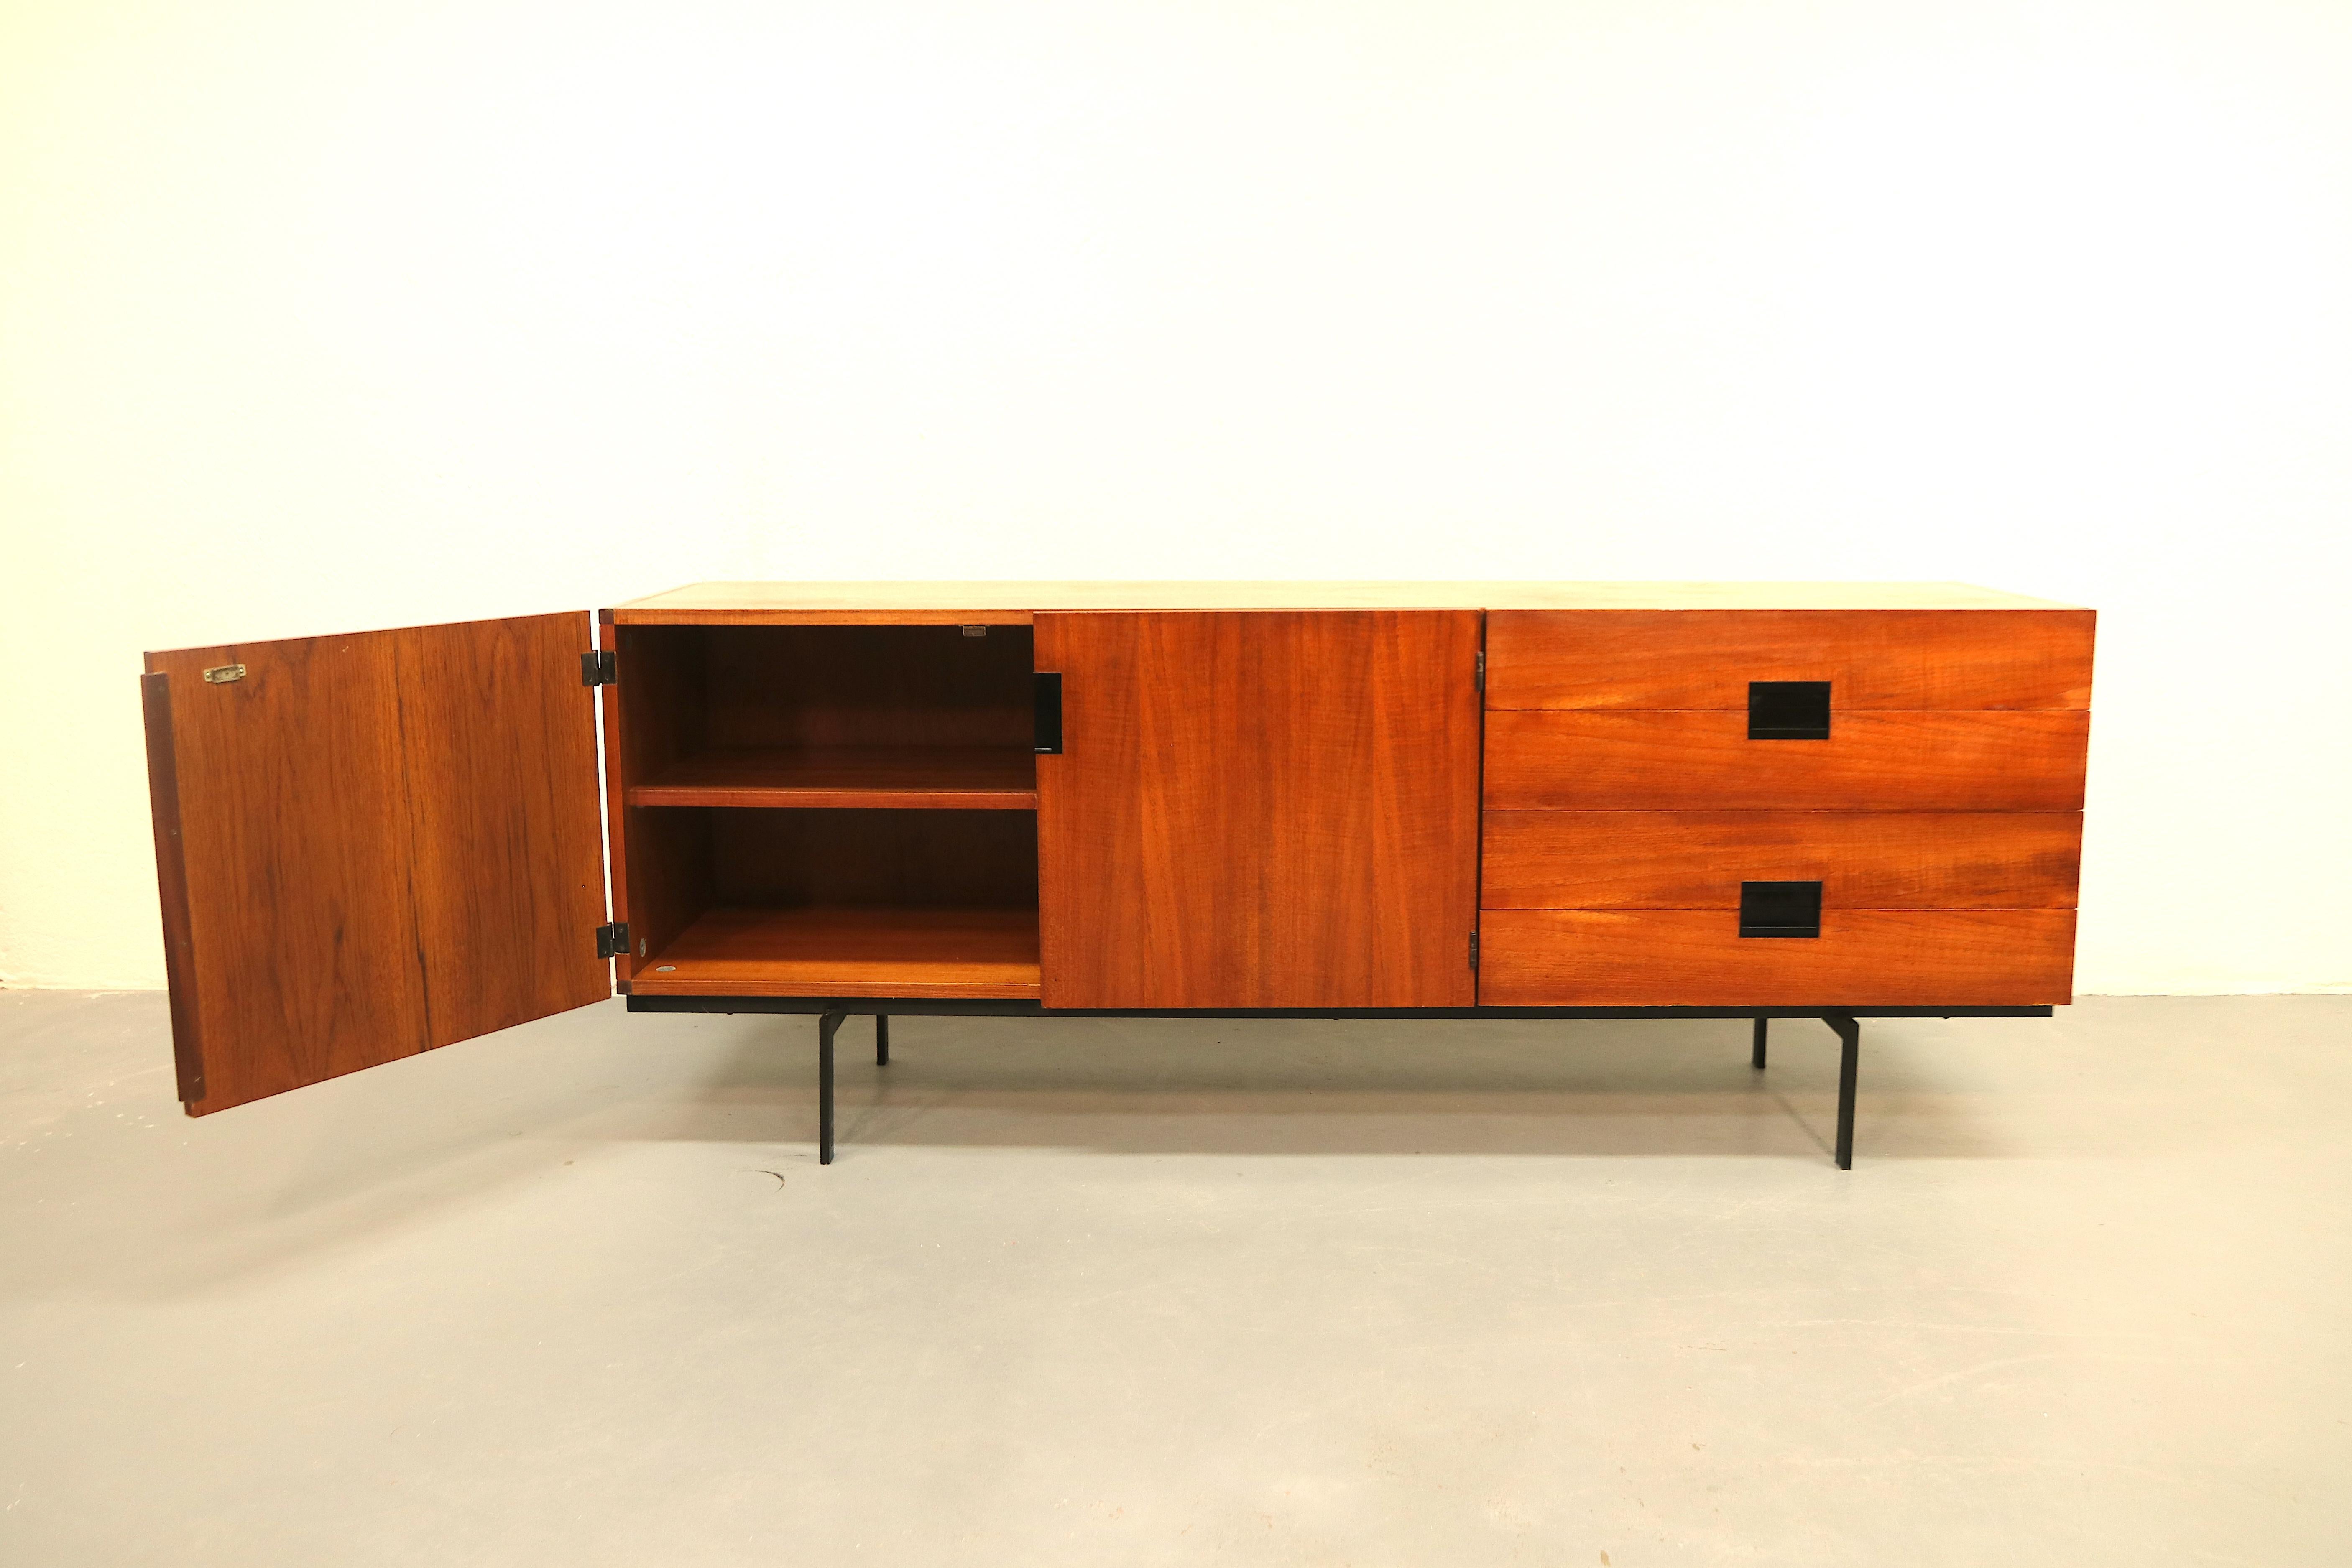 Dutch Mid-Century Modern iconic sideboard or credenza model DU04 (2 doors, wide drawers) by Cees Braakman for manufacturer Pastoe. This is the rarest and most sought-after model, it is slightly smaller than the DU03 model, has 2 larger doors